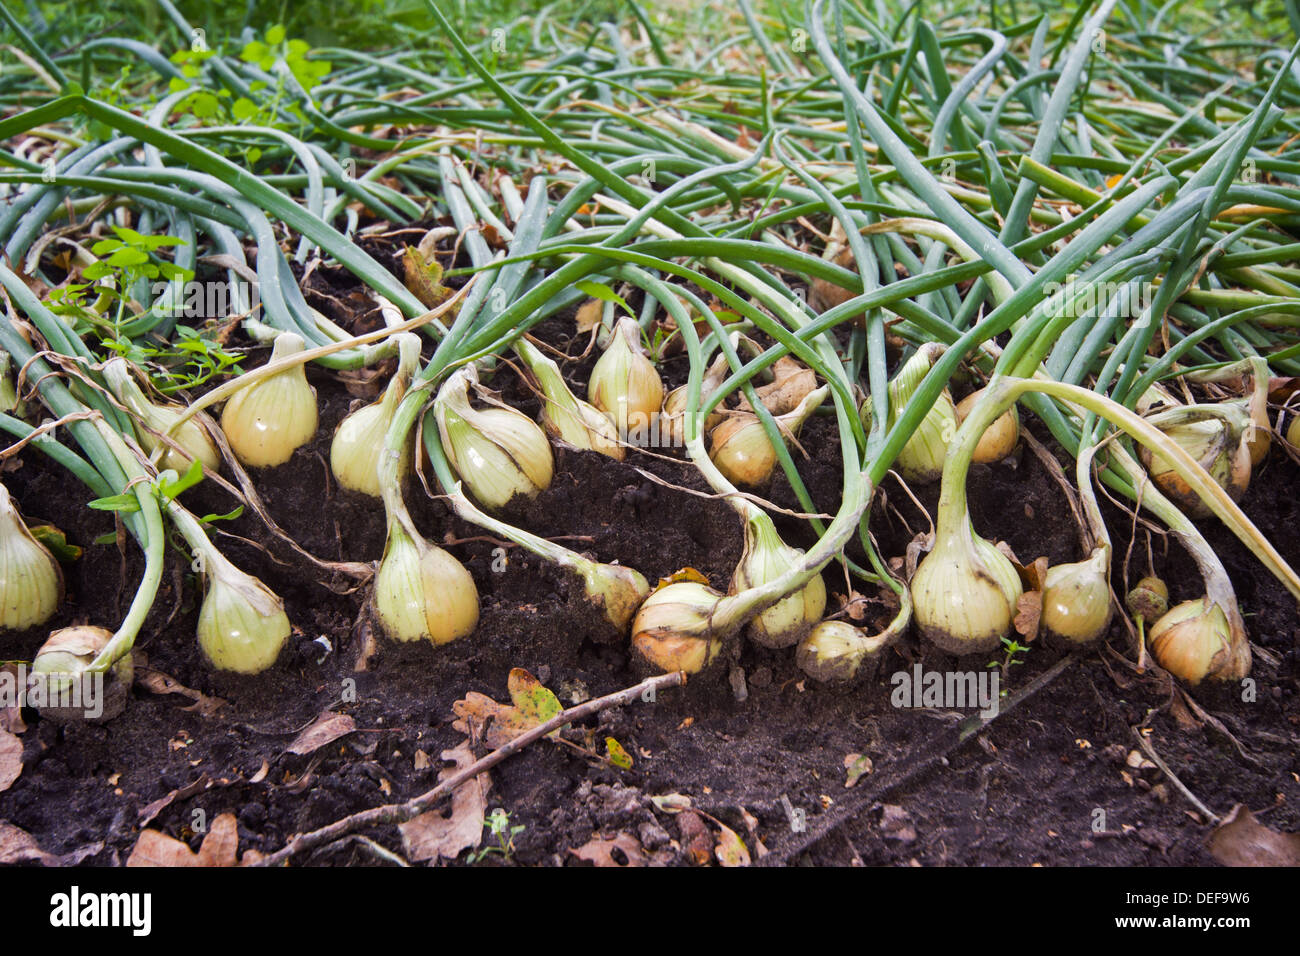 Onions growing in rows on a field Stock Photo